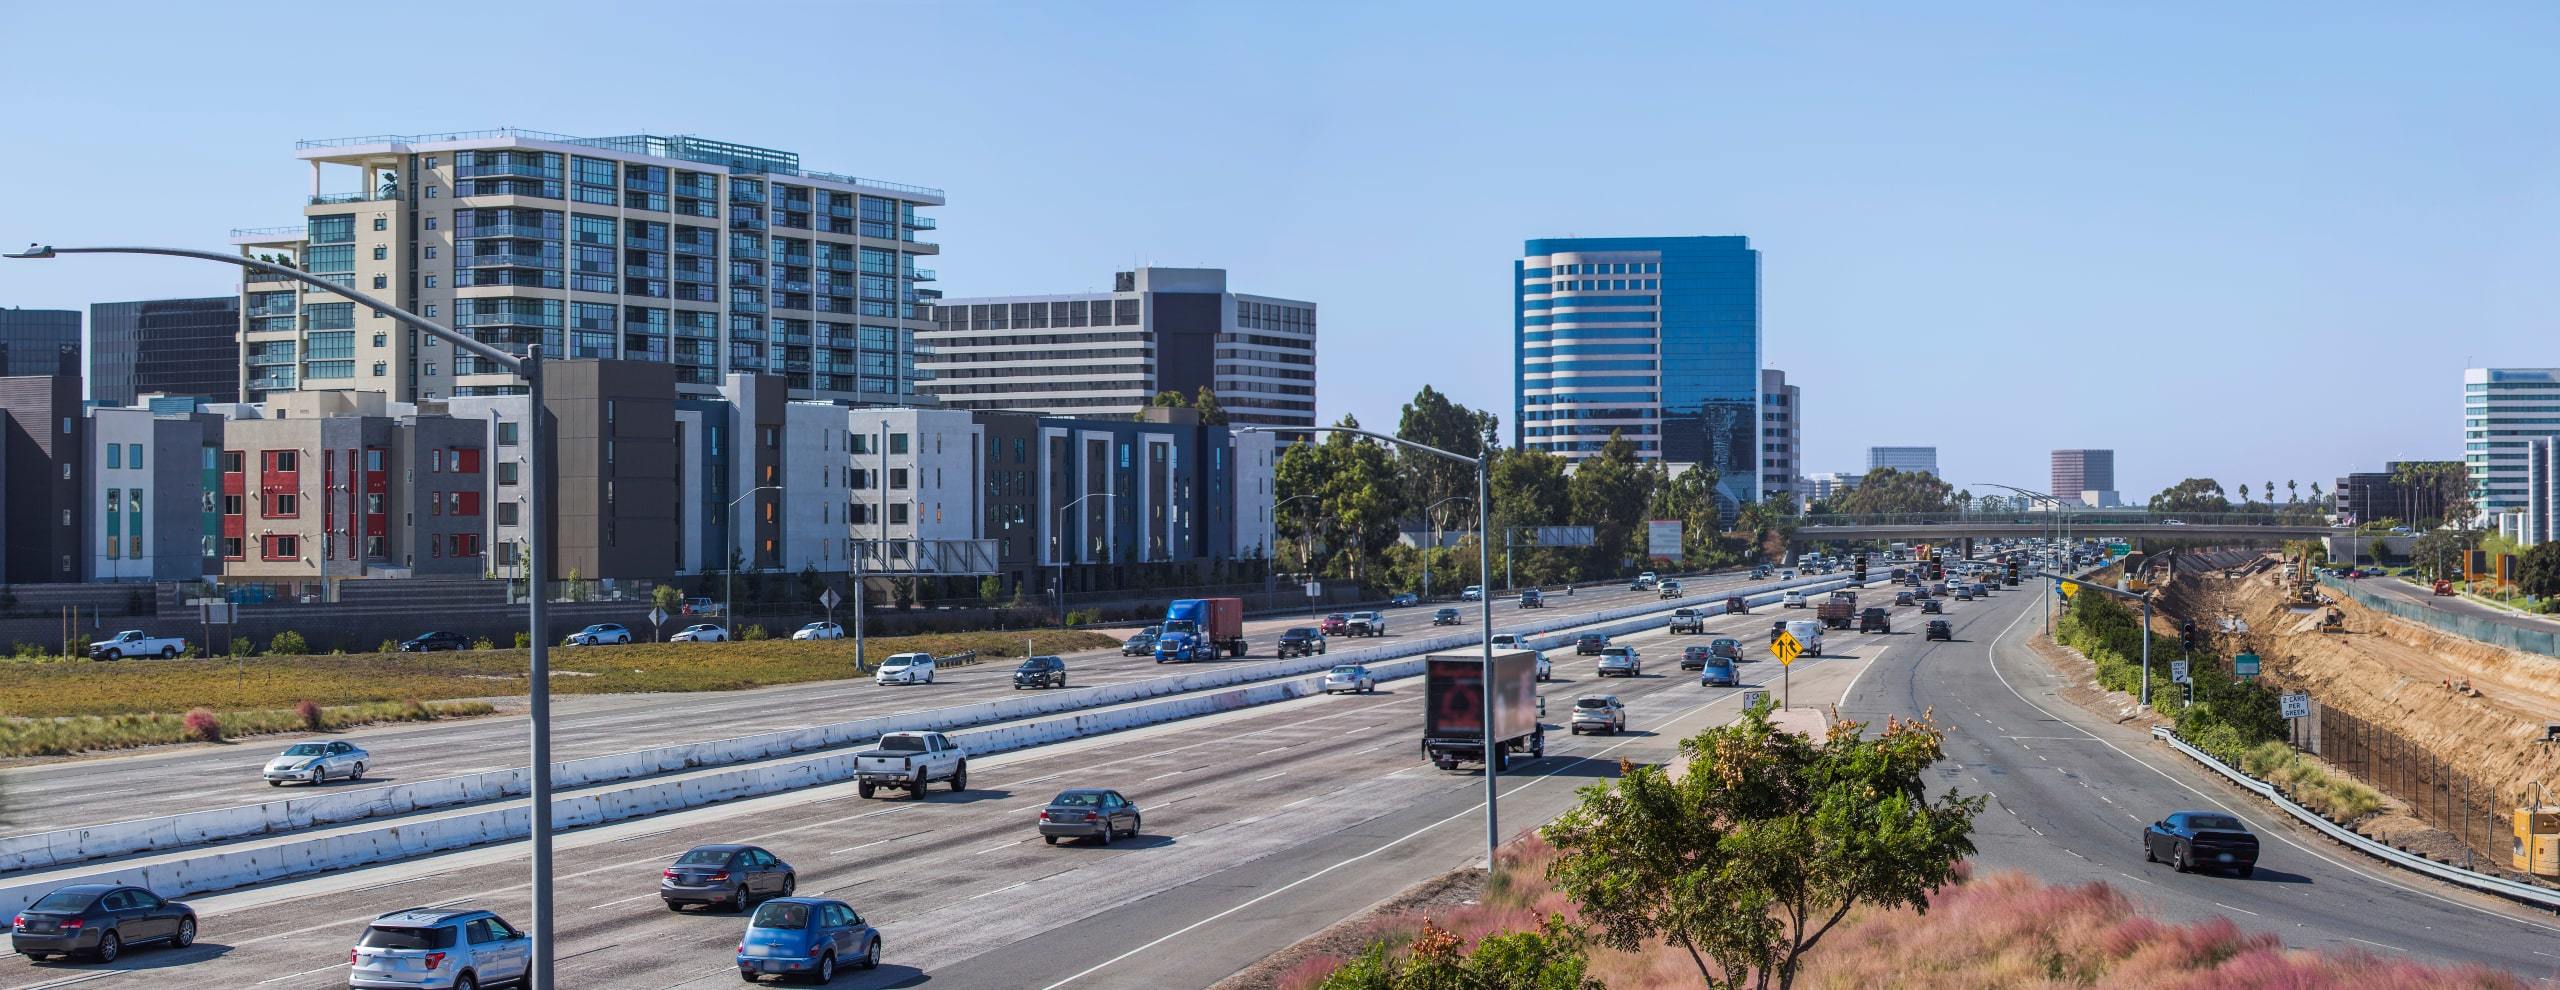 Sunny view of condos and highway around Maxfield at Central Park West, Irvine